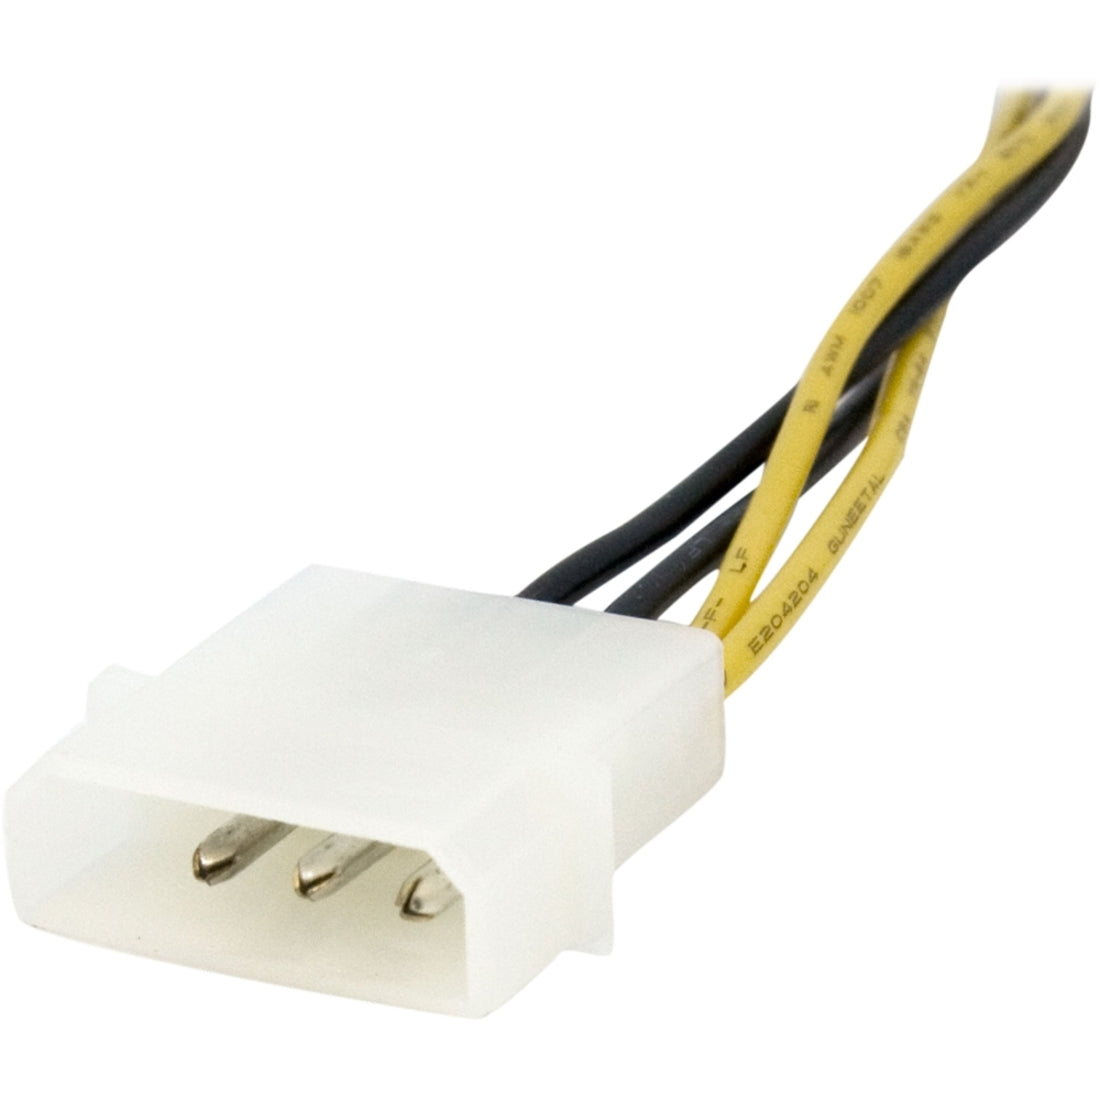 StarTech.com EPS48ADAP 6in 4 Pin to 8 Pin EPS Power Adapter with LP4 F/M, 12V DC Voltage Rating